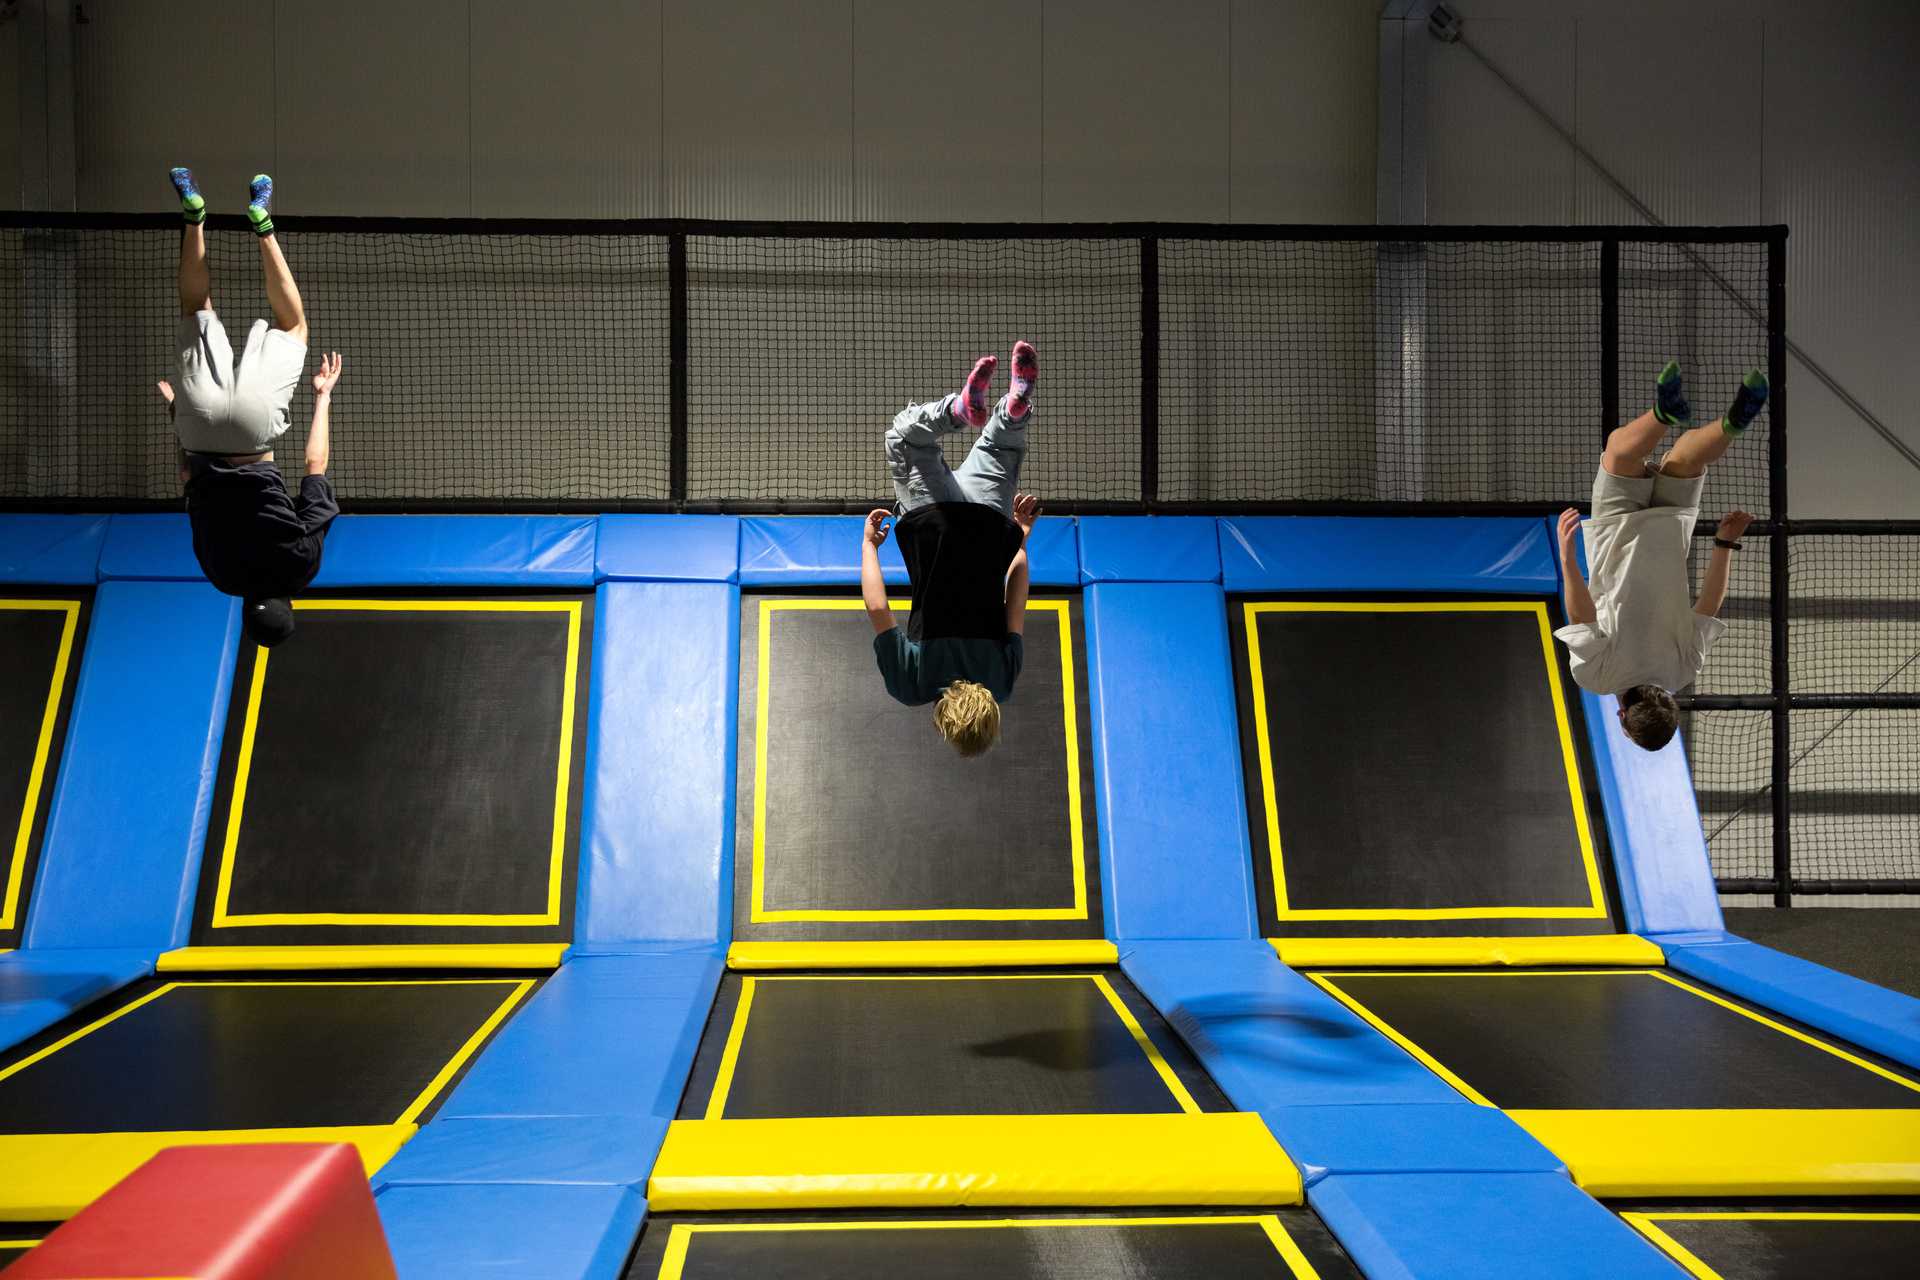 Trampolining: Multi-level playground and an acrobatics facility, Recreational gymnastic sports discipline. 1920x1280 HD Background.